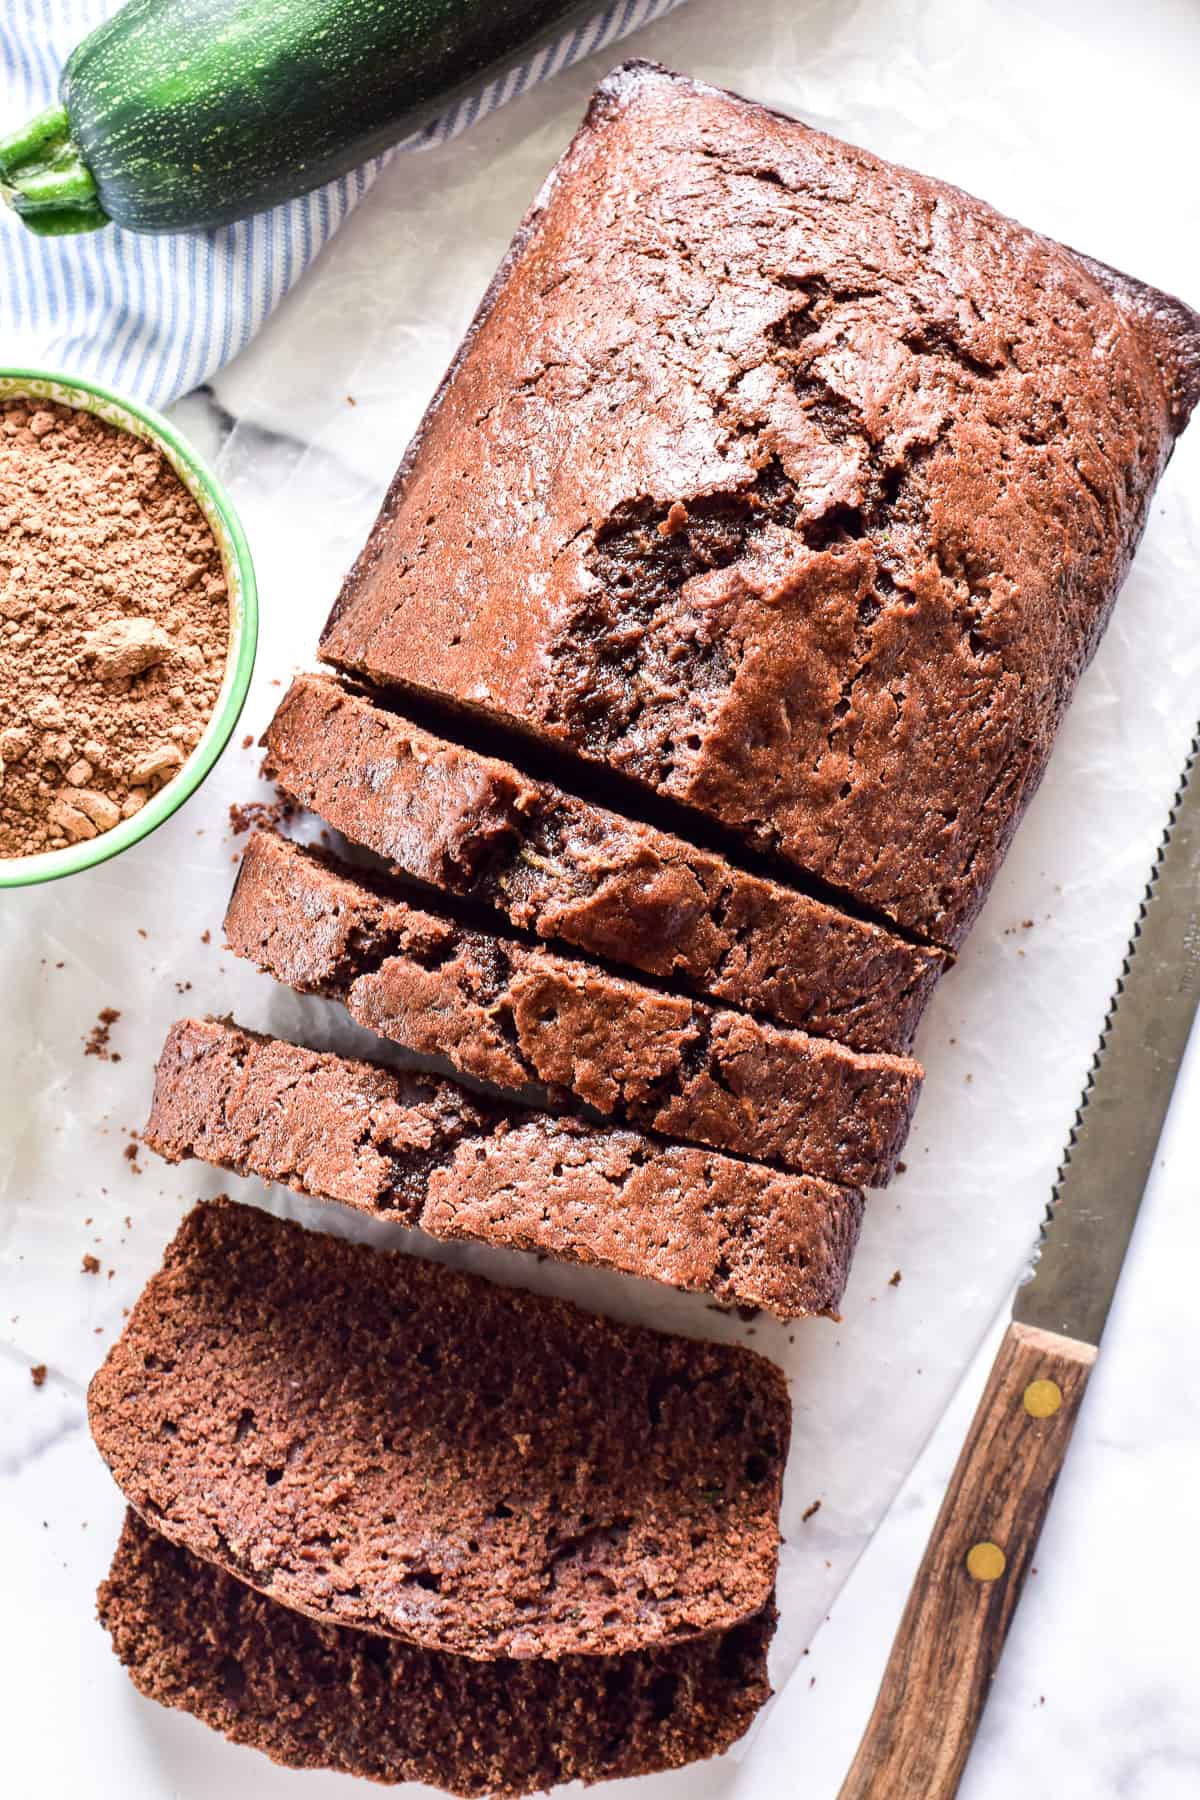 Overhead image of sliced Chocolate Zucchini Bread with a knife